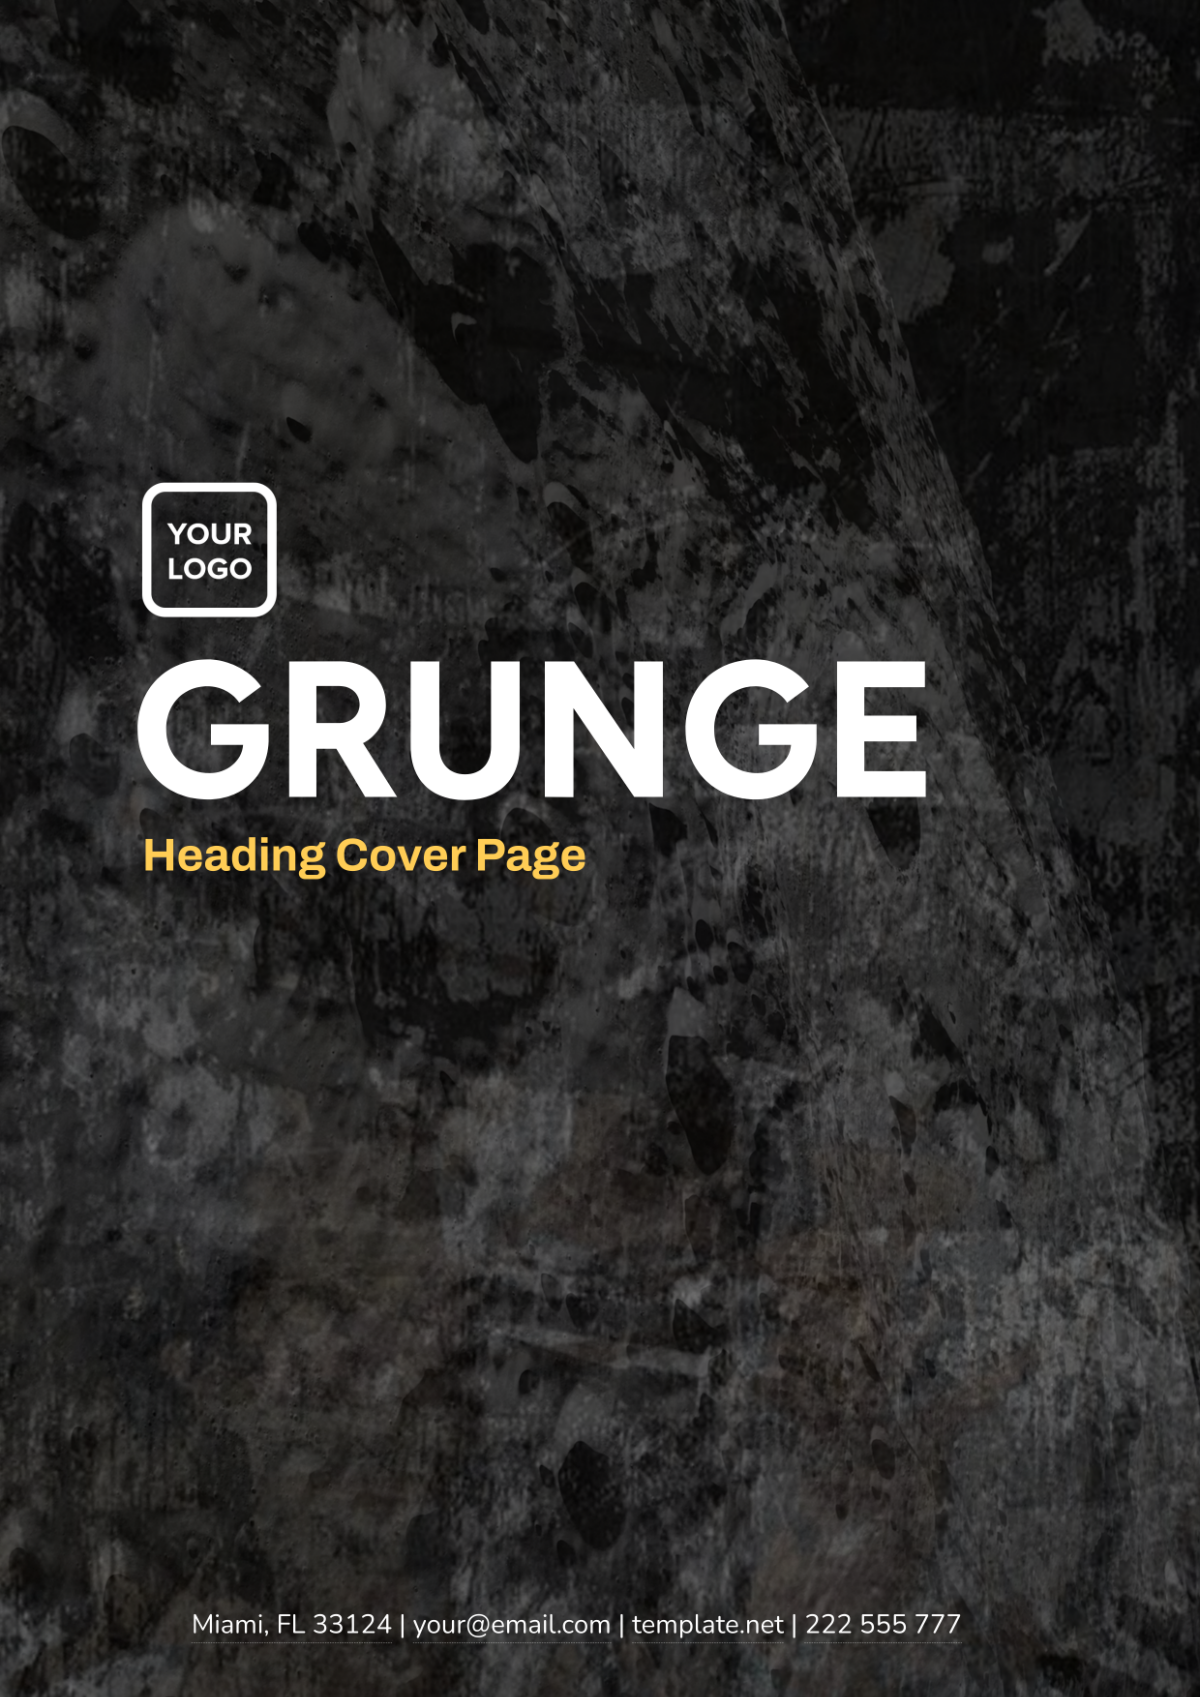 Grunge Heading Cover Page Template